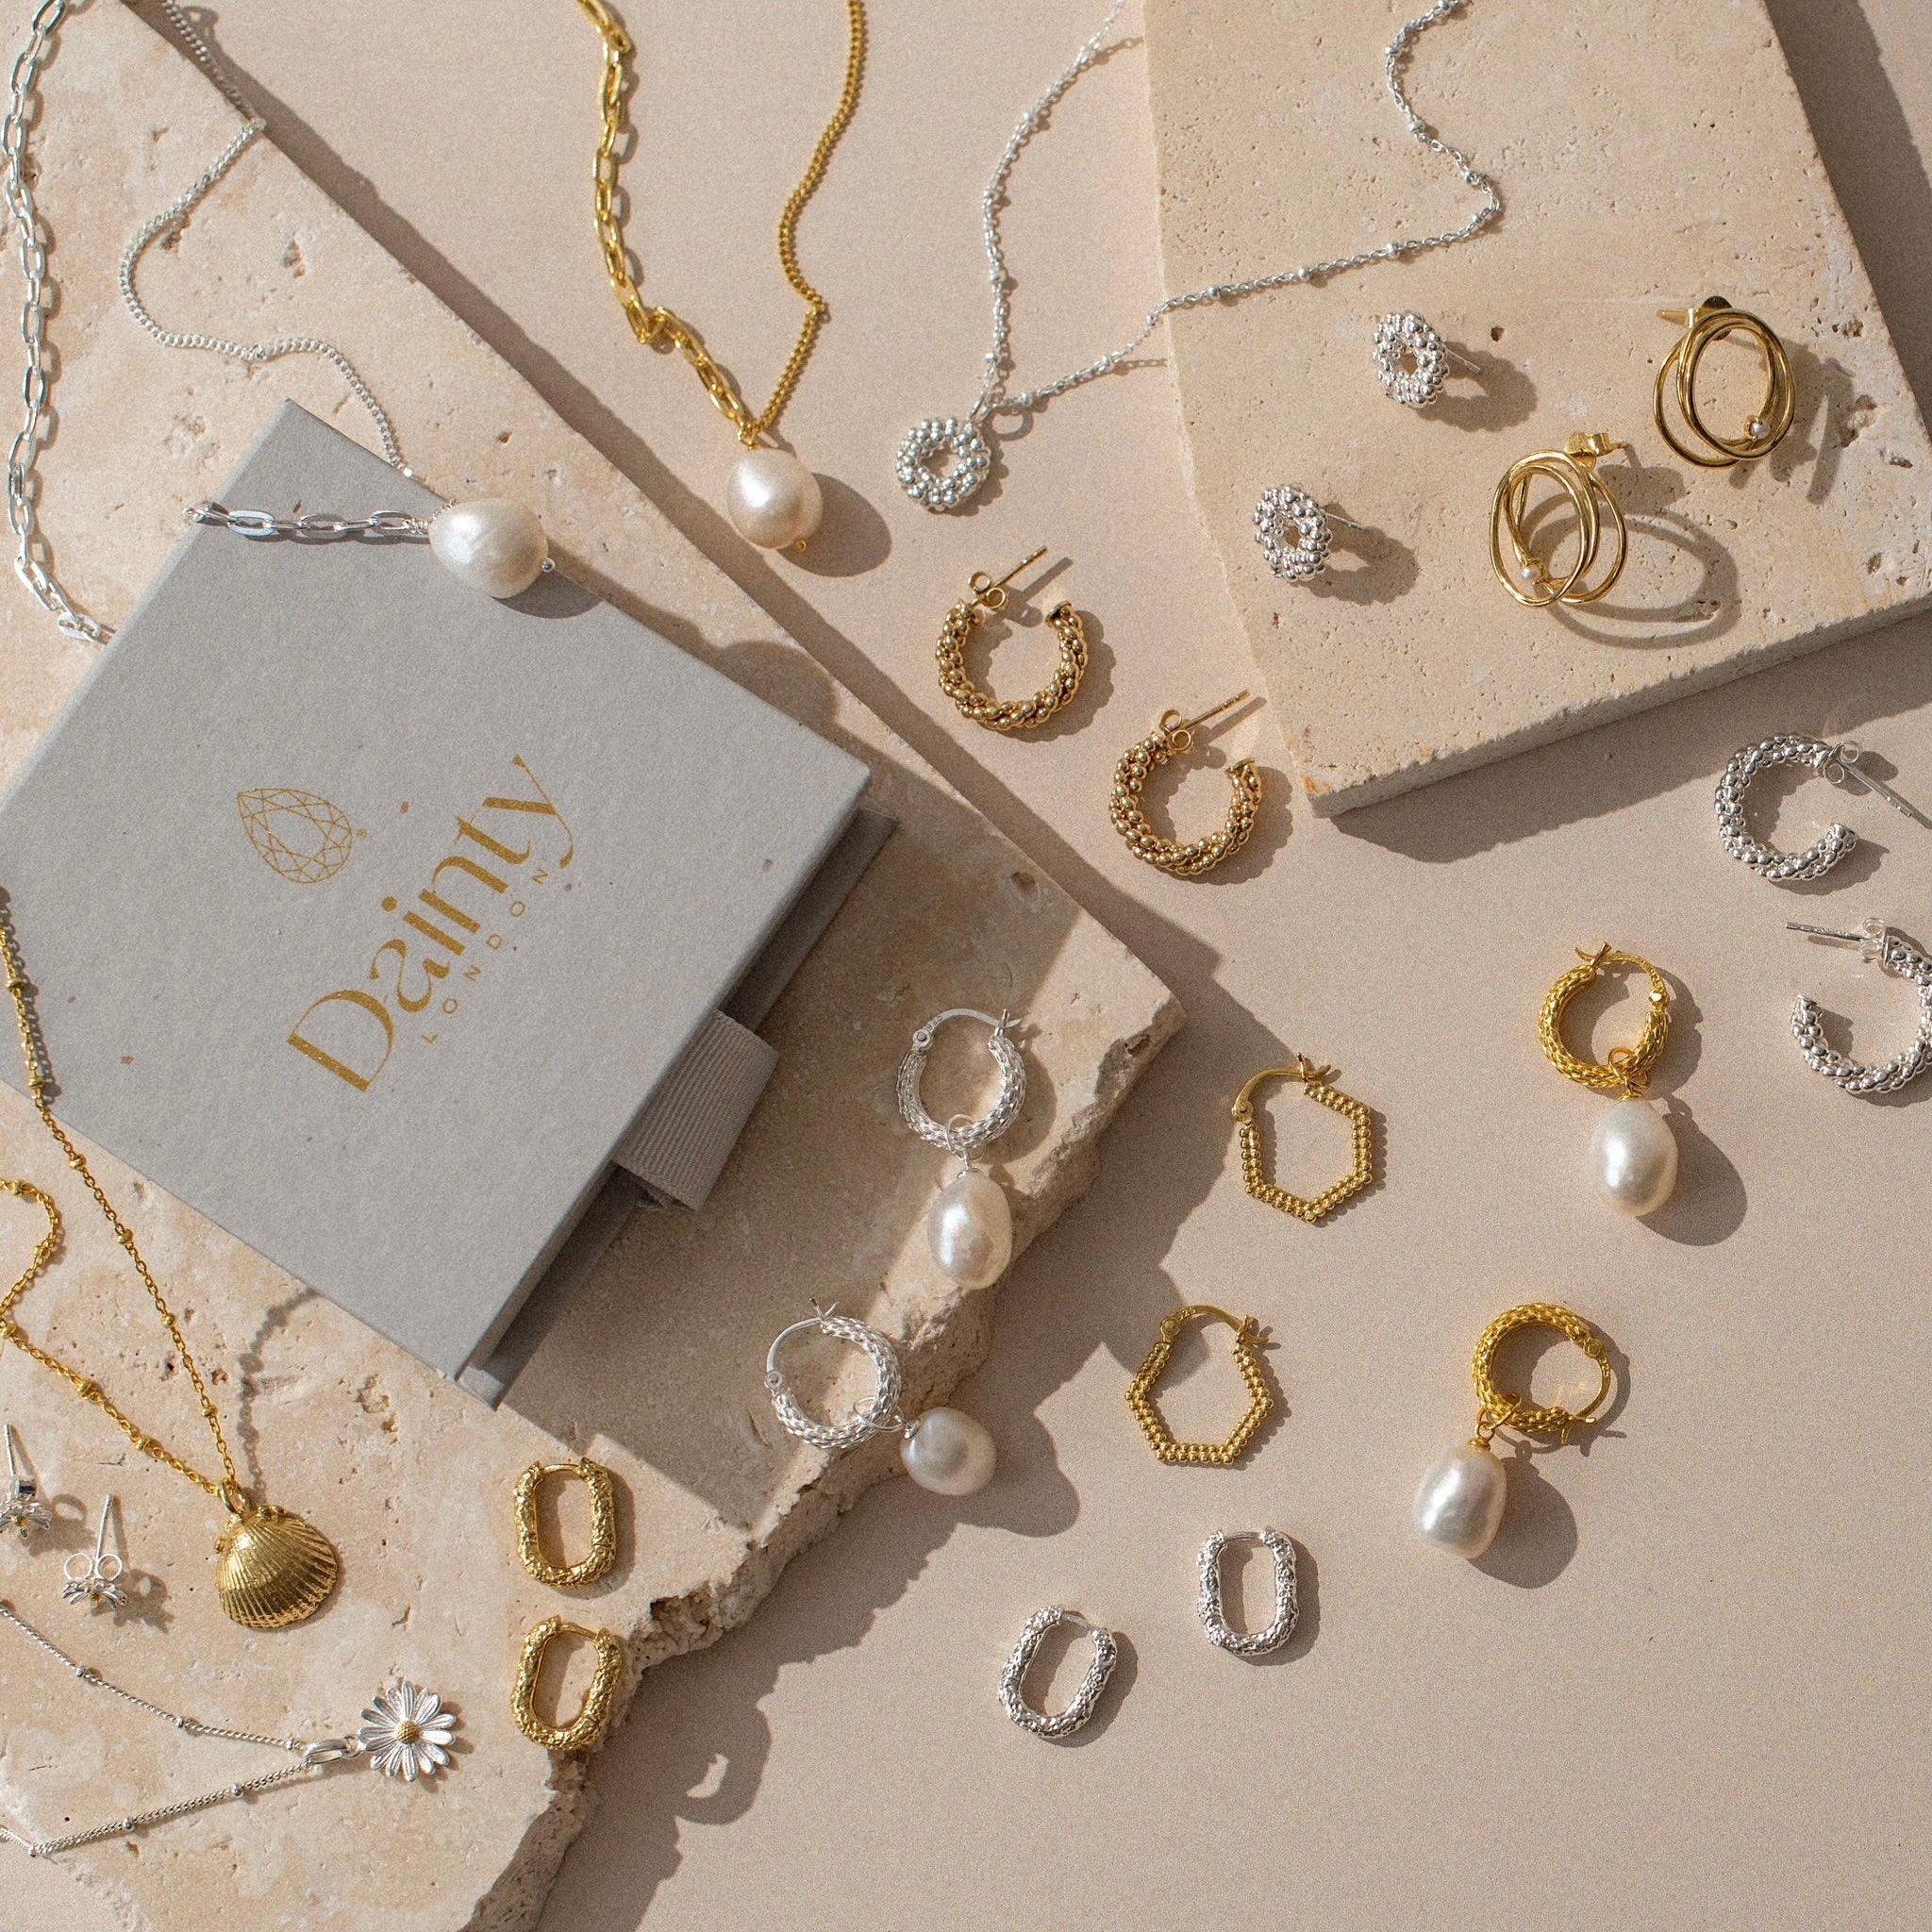 Intriguing Treasures MIXED METALS Subscription Box - pay in full - Dainty London